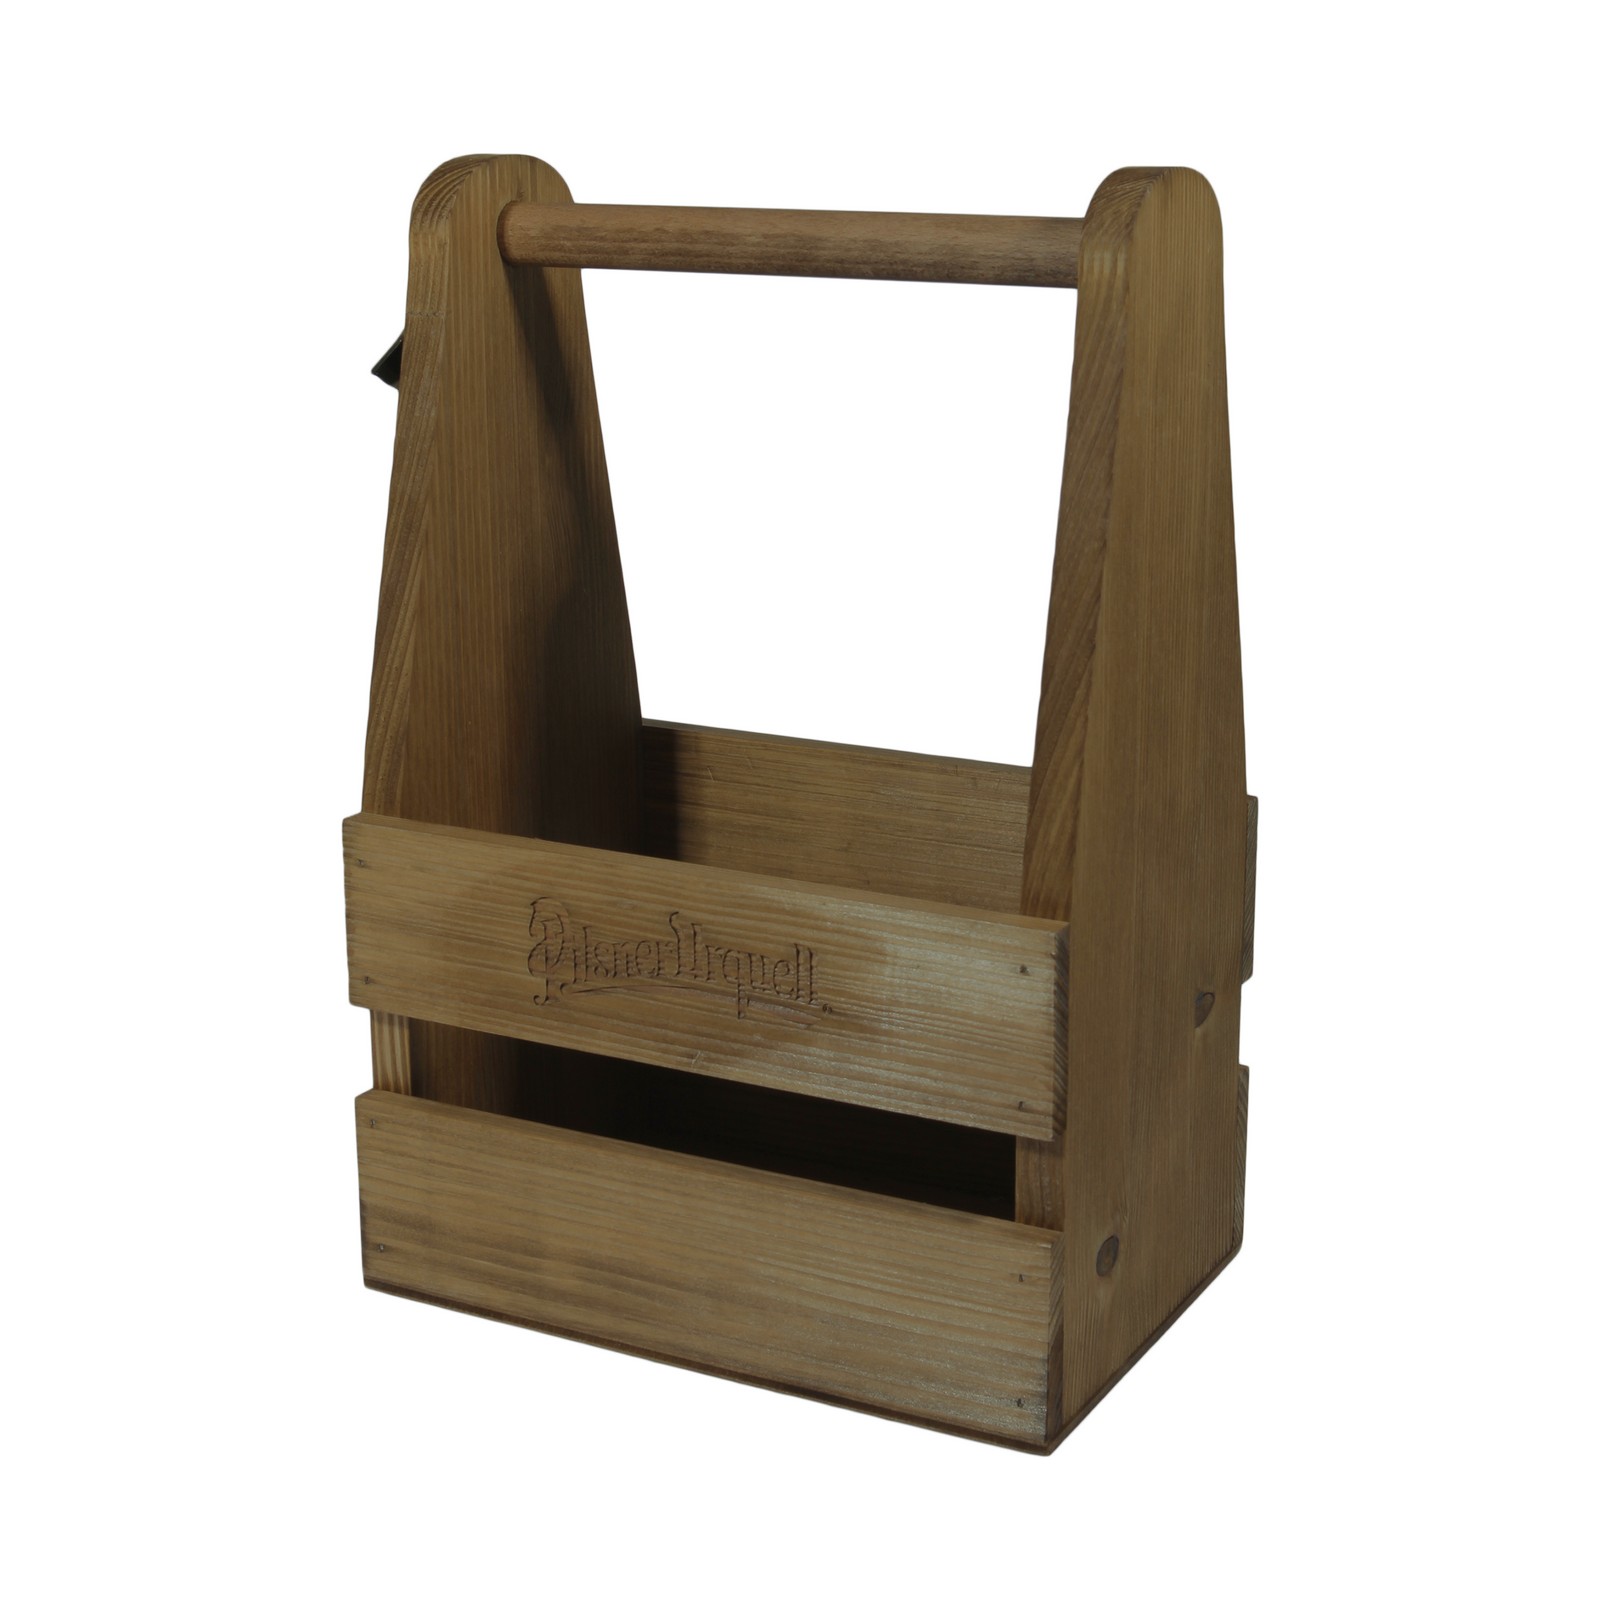 Crate for 6 Bottles With a Bottle Opener